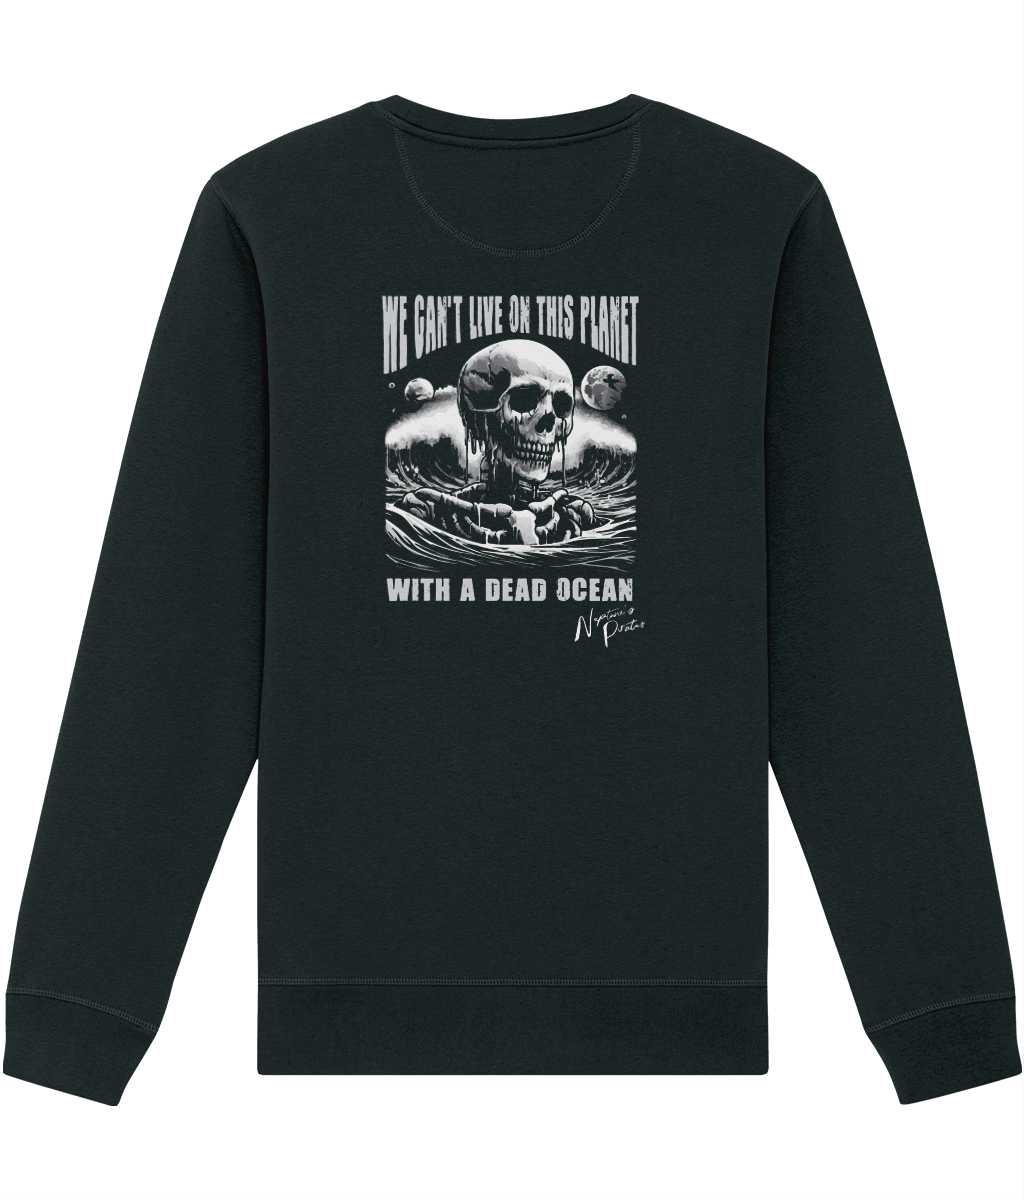 'We can't live on this planet with a dead ocean' Unisex Sweatshirt